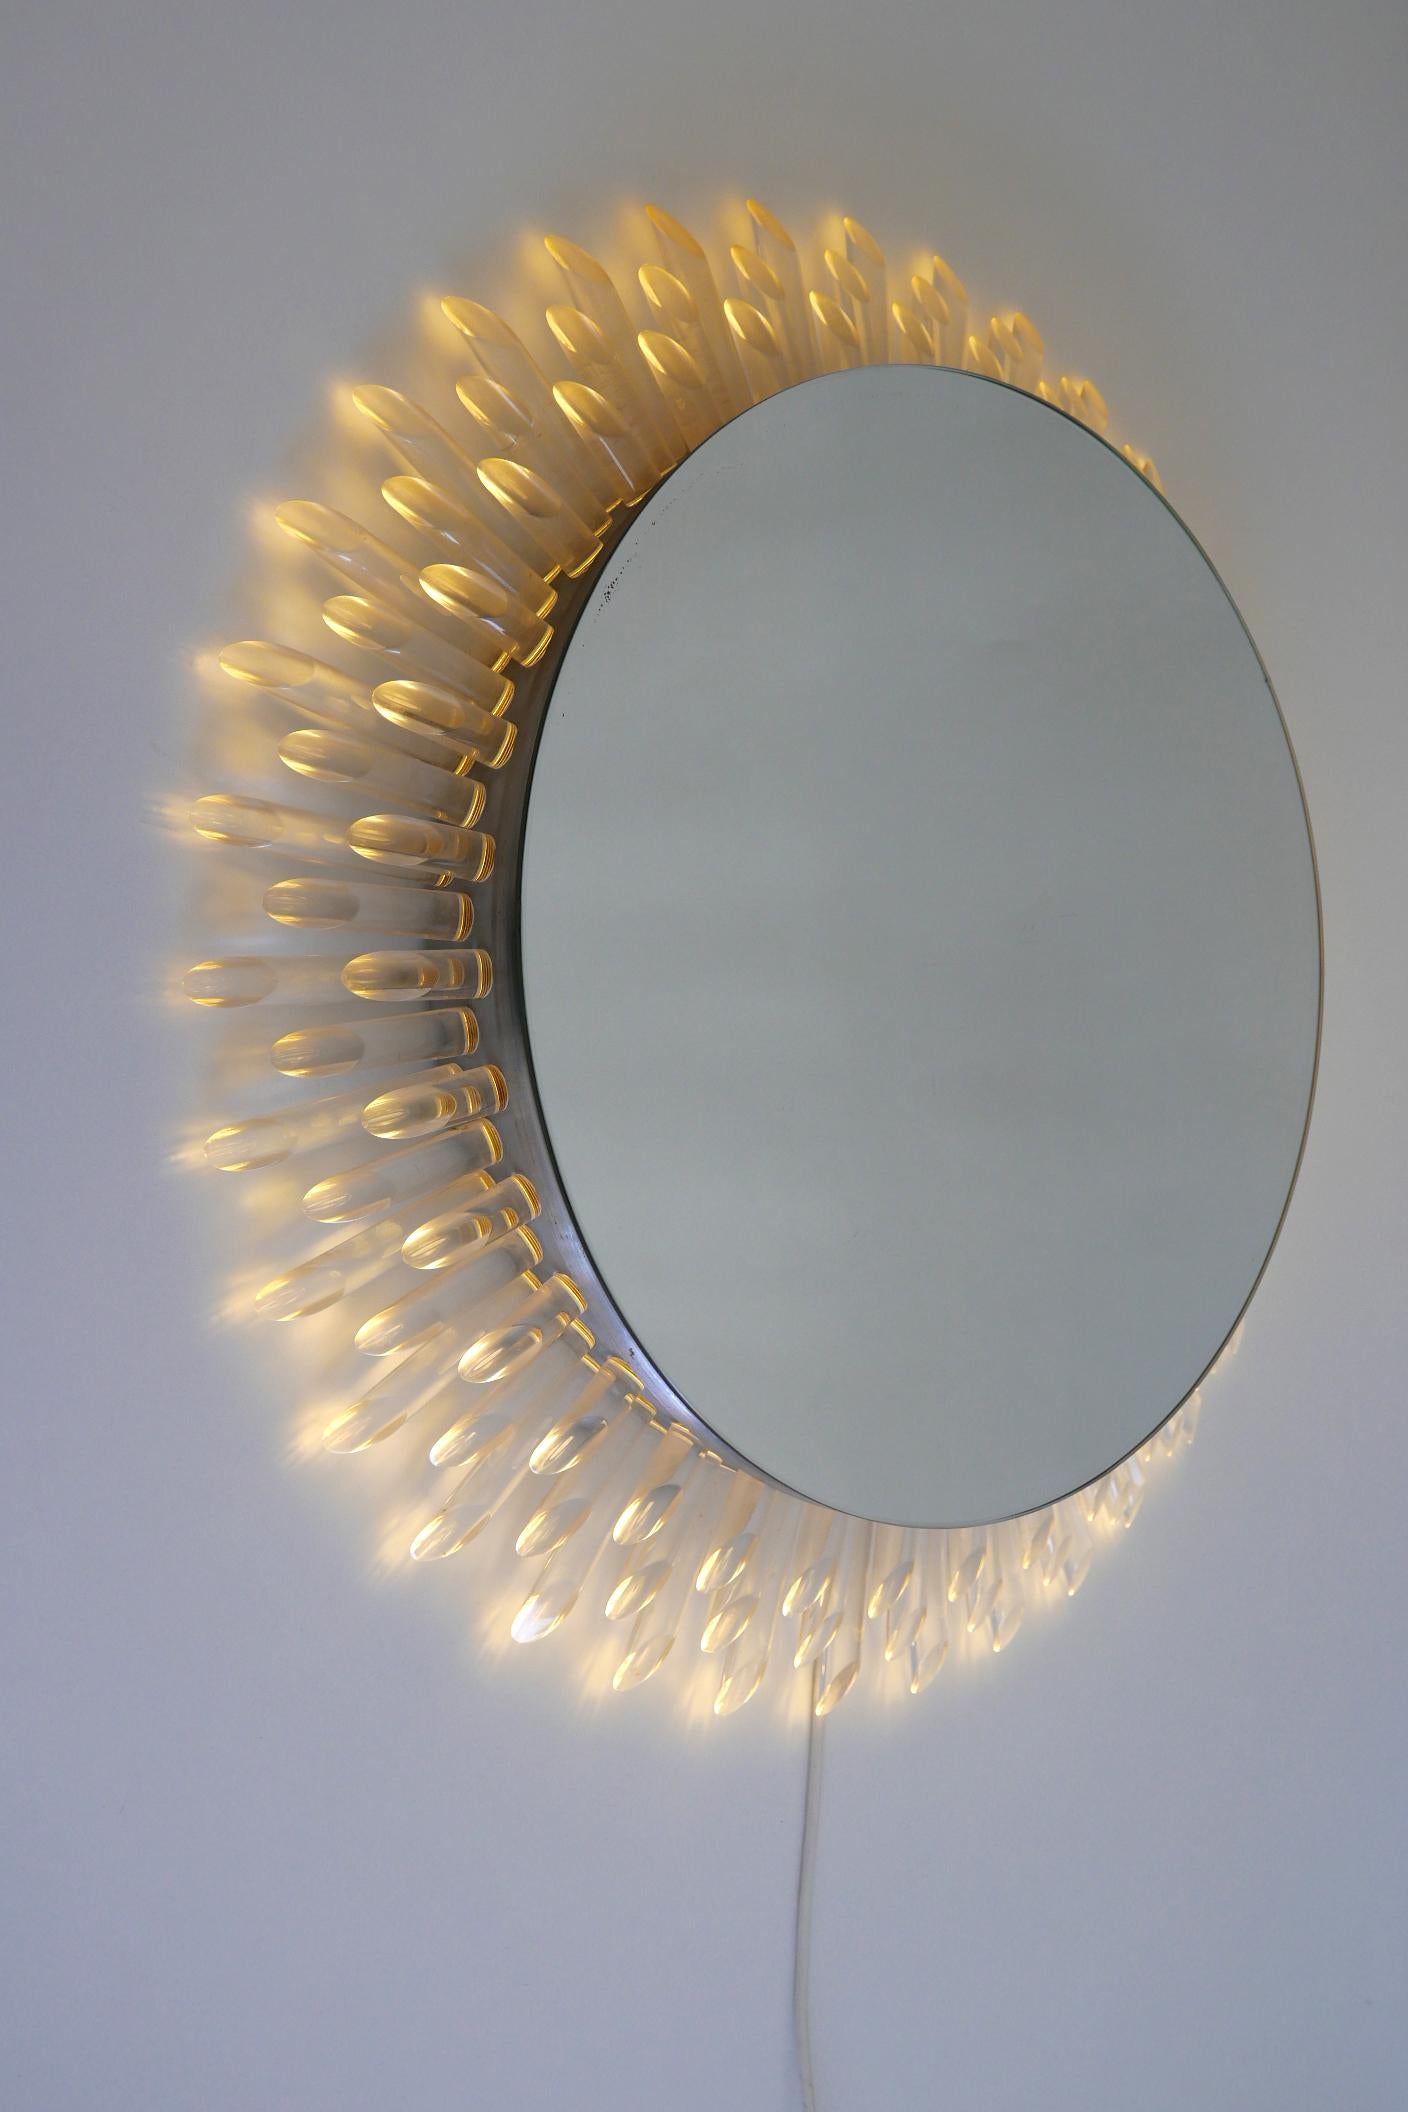 Spectacular Large Mid-Century Modern Backlit Sunburst Wall Mirror Germany 1970s For Sale 4